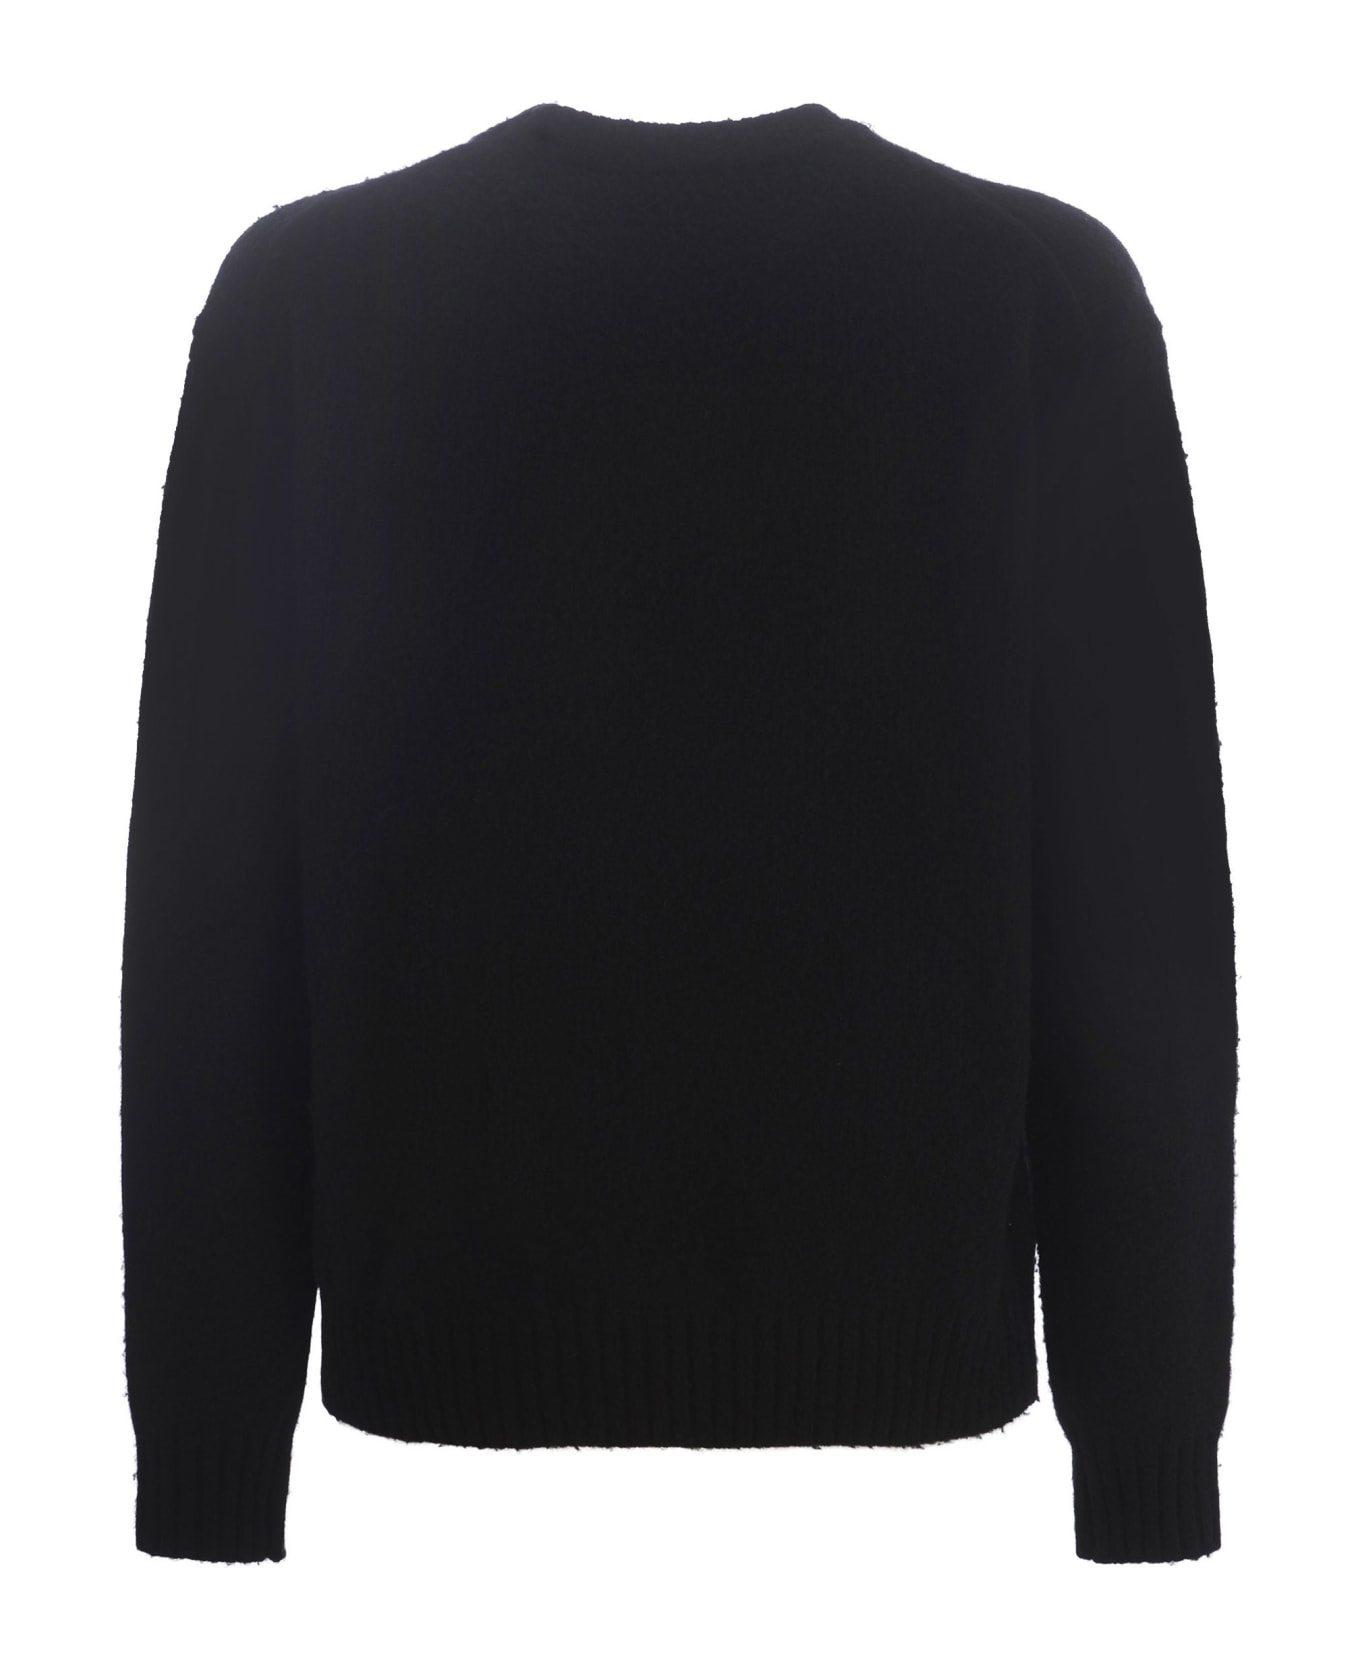 Axel Arigato Sweater Axel Arigato "clay" In Wool And Cashmere Blend - Nero